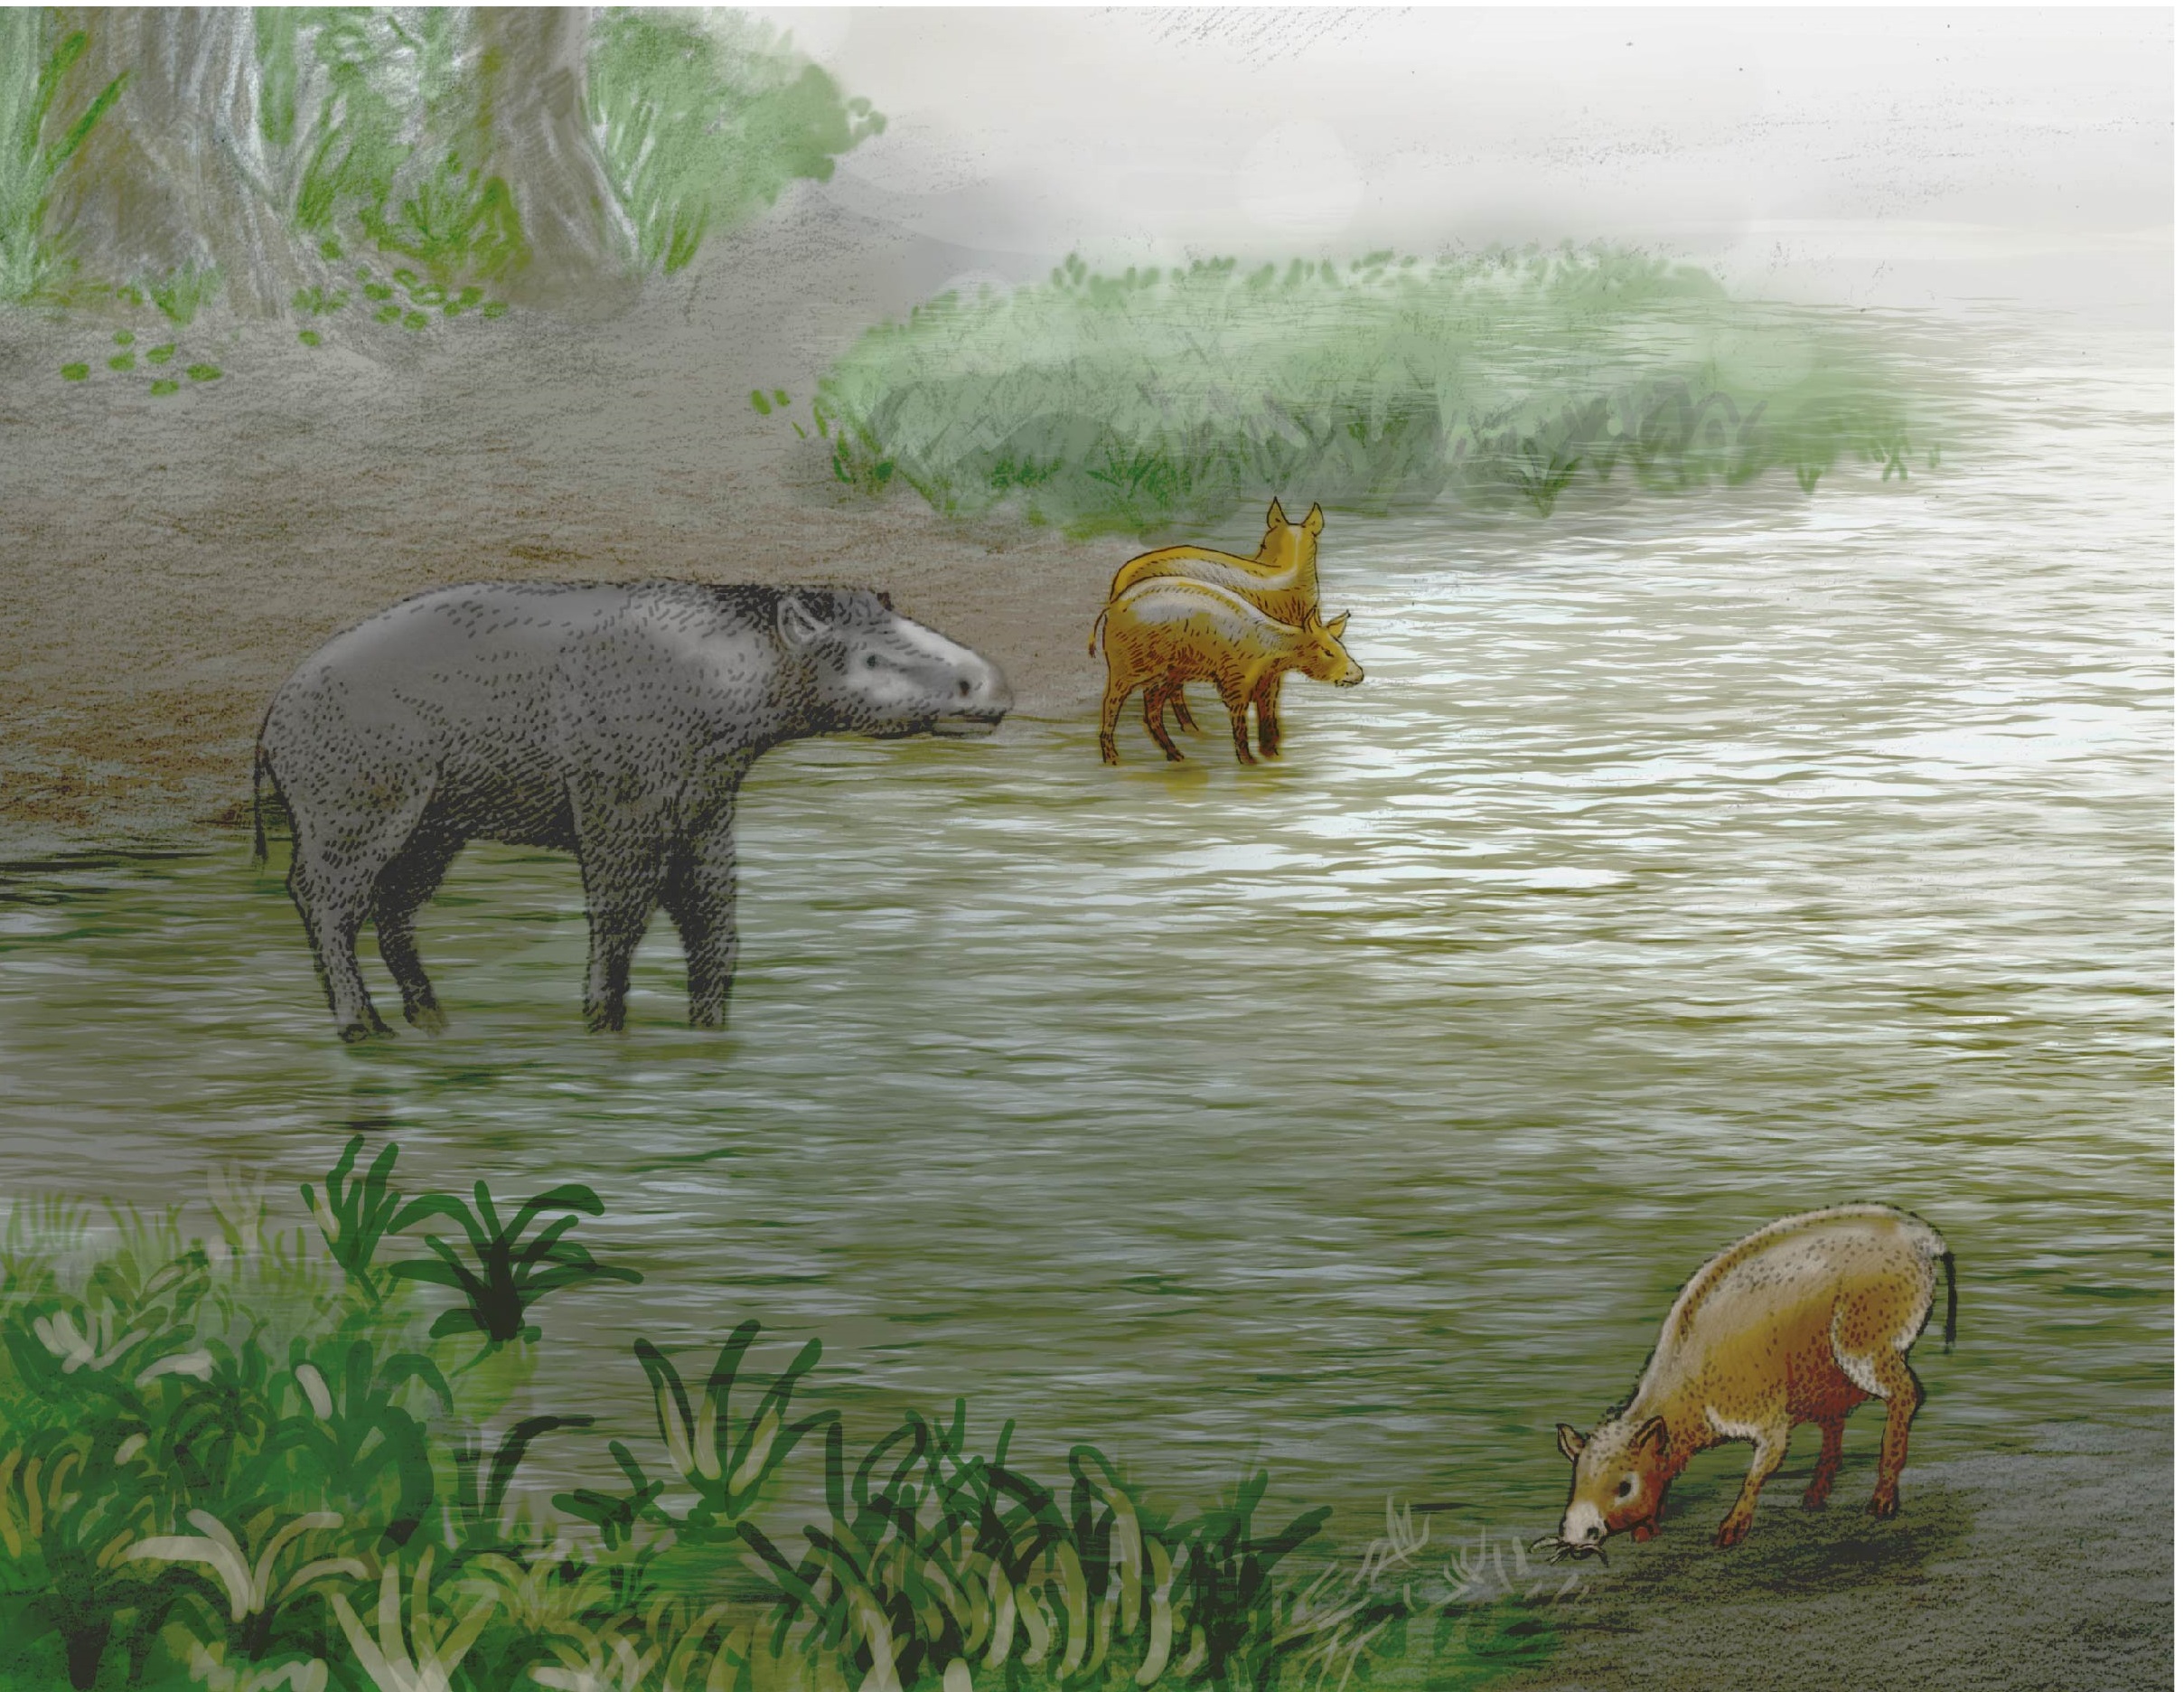 Detail of the margin of Lake Zambrana (Álava) from 37 million years ago. On the left the new species of paleoterid ‘Leptolophuscostiai’ and in the center and on the right another equoid perissodactyl, ‘Pachynolophus zambranensis’, also defined for the first time in the Alava paleontological enclave. Paleoillustration: Ulises Martínez Cabrera.